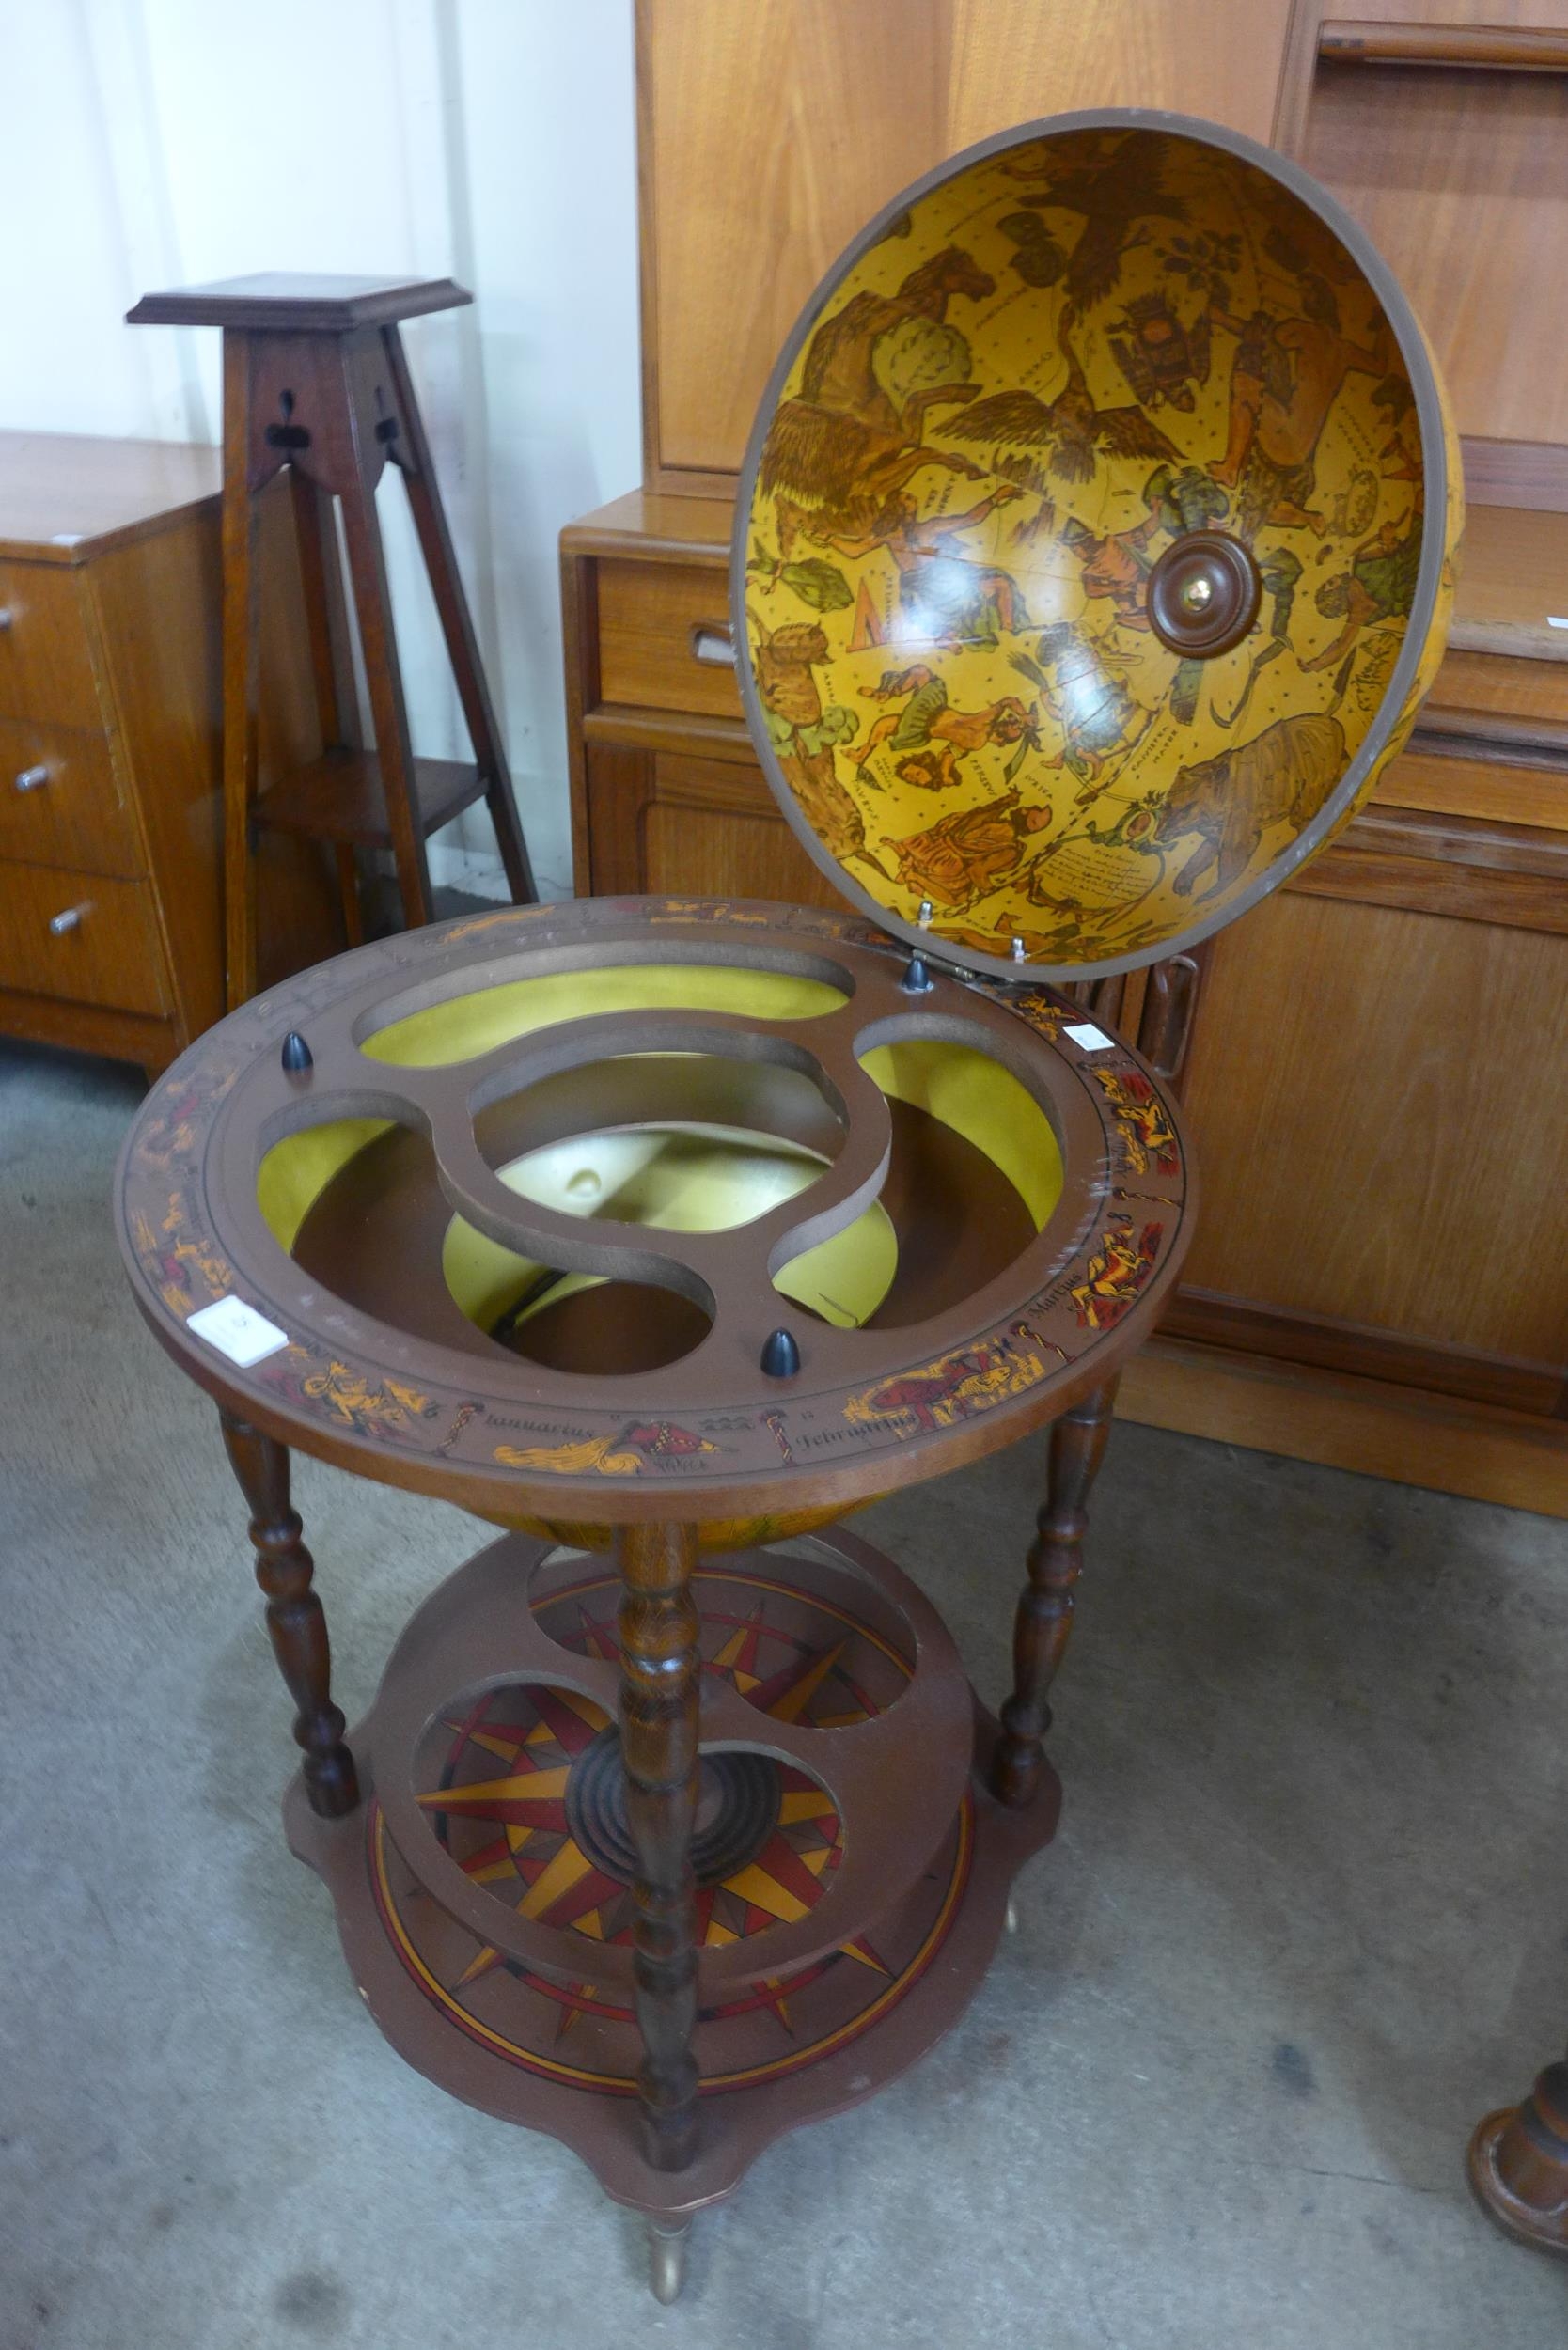 An Italian terrestrial globe cocktail cabinet/trolley - Image 2 of 2